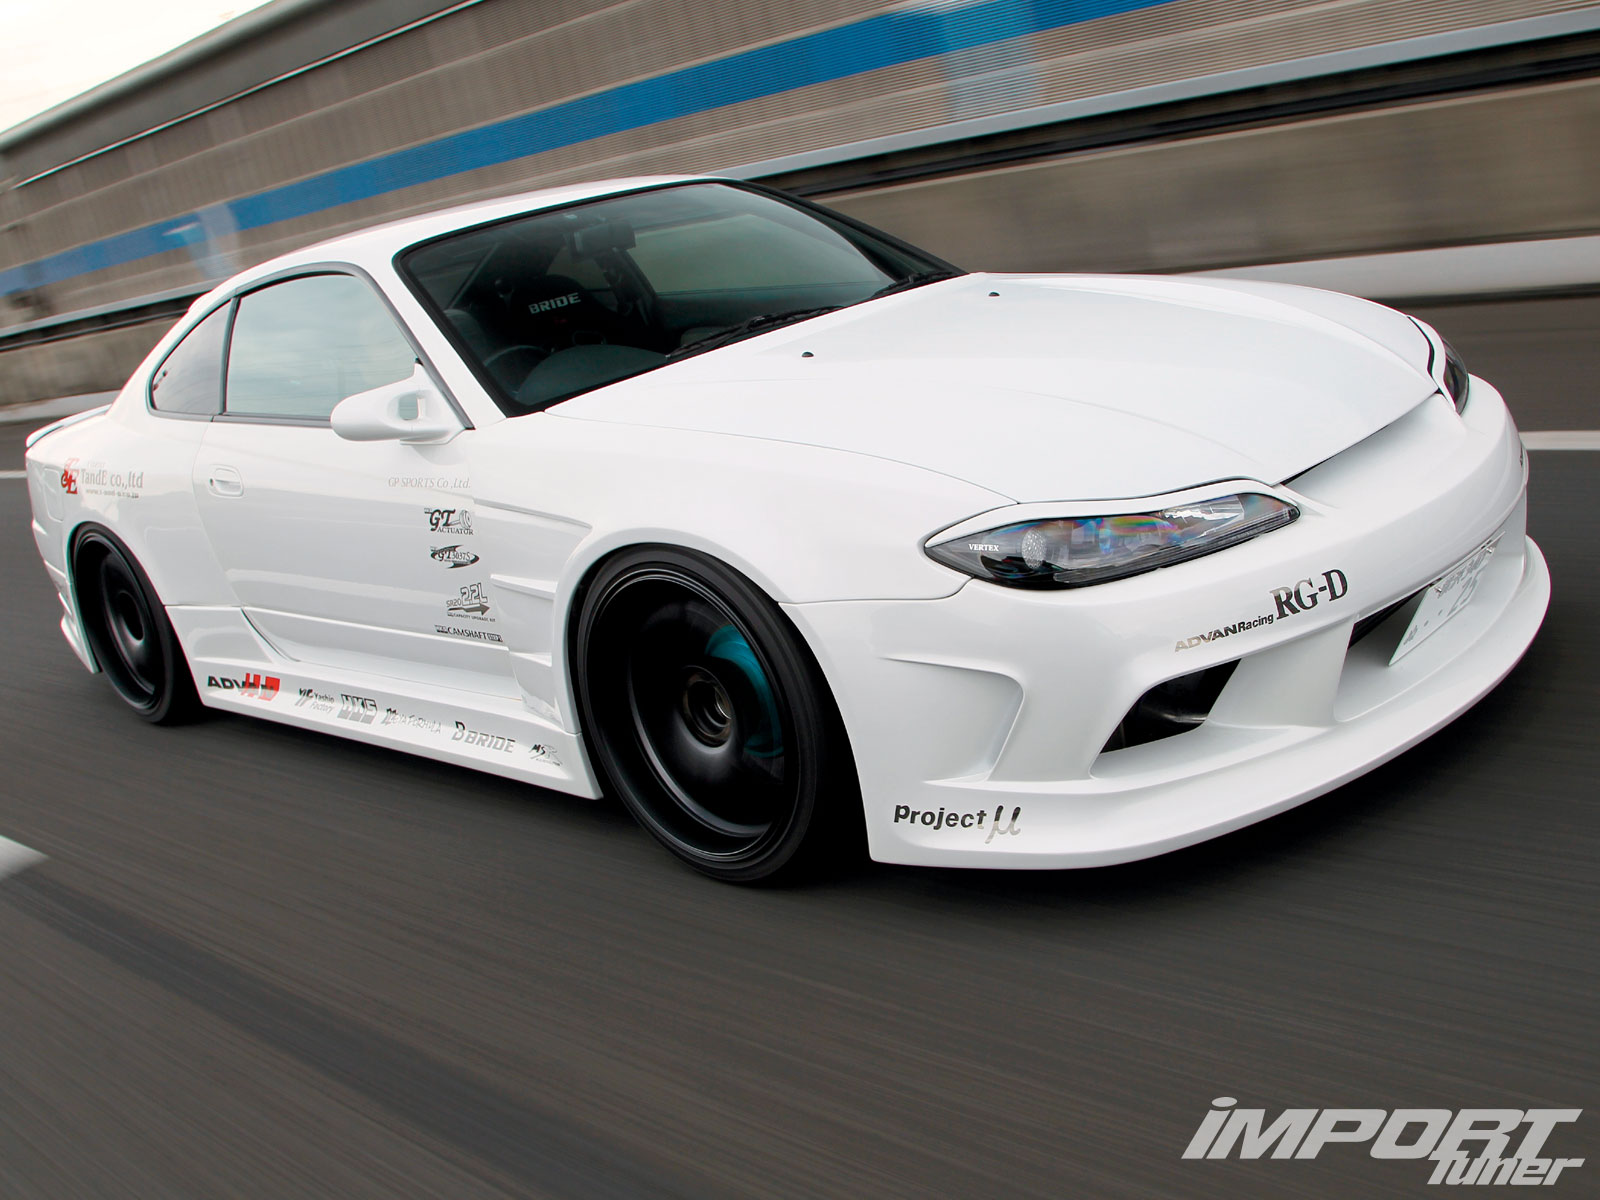 impp_1012_01_o+nissan_s15_silvia+front_view.jpg